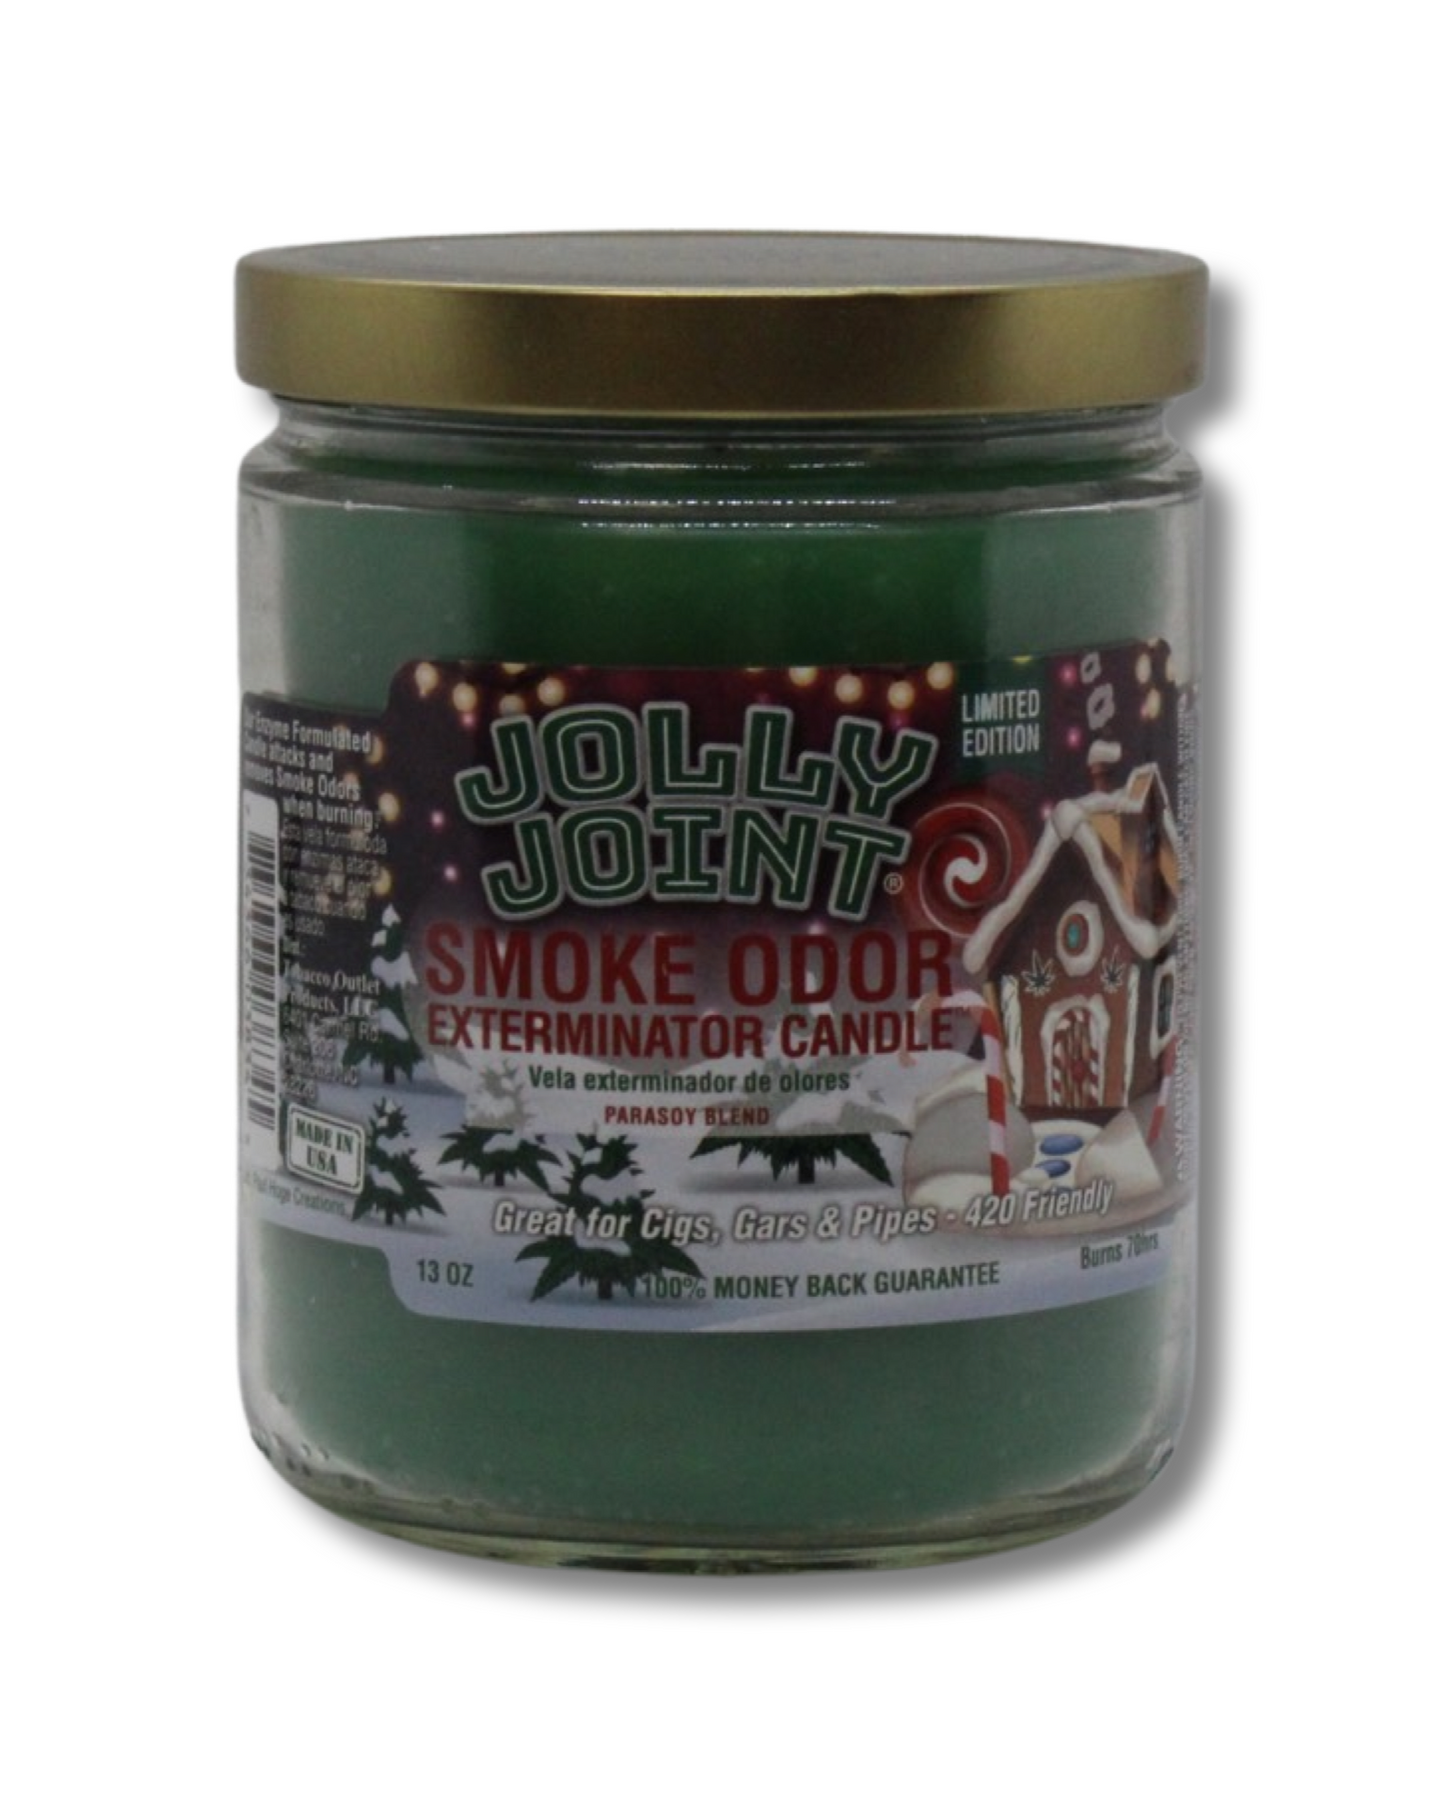 Smoke Odor Exterminator Candle Jolly Joint